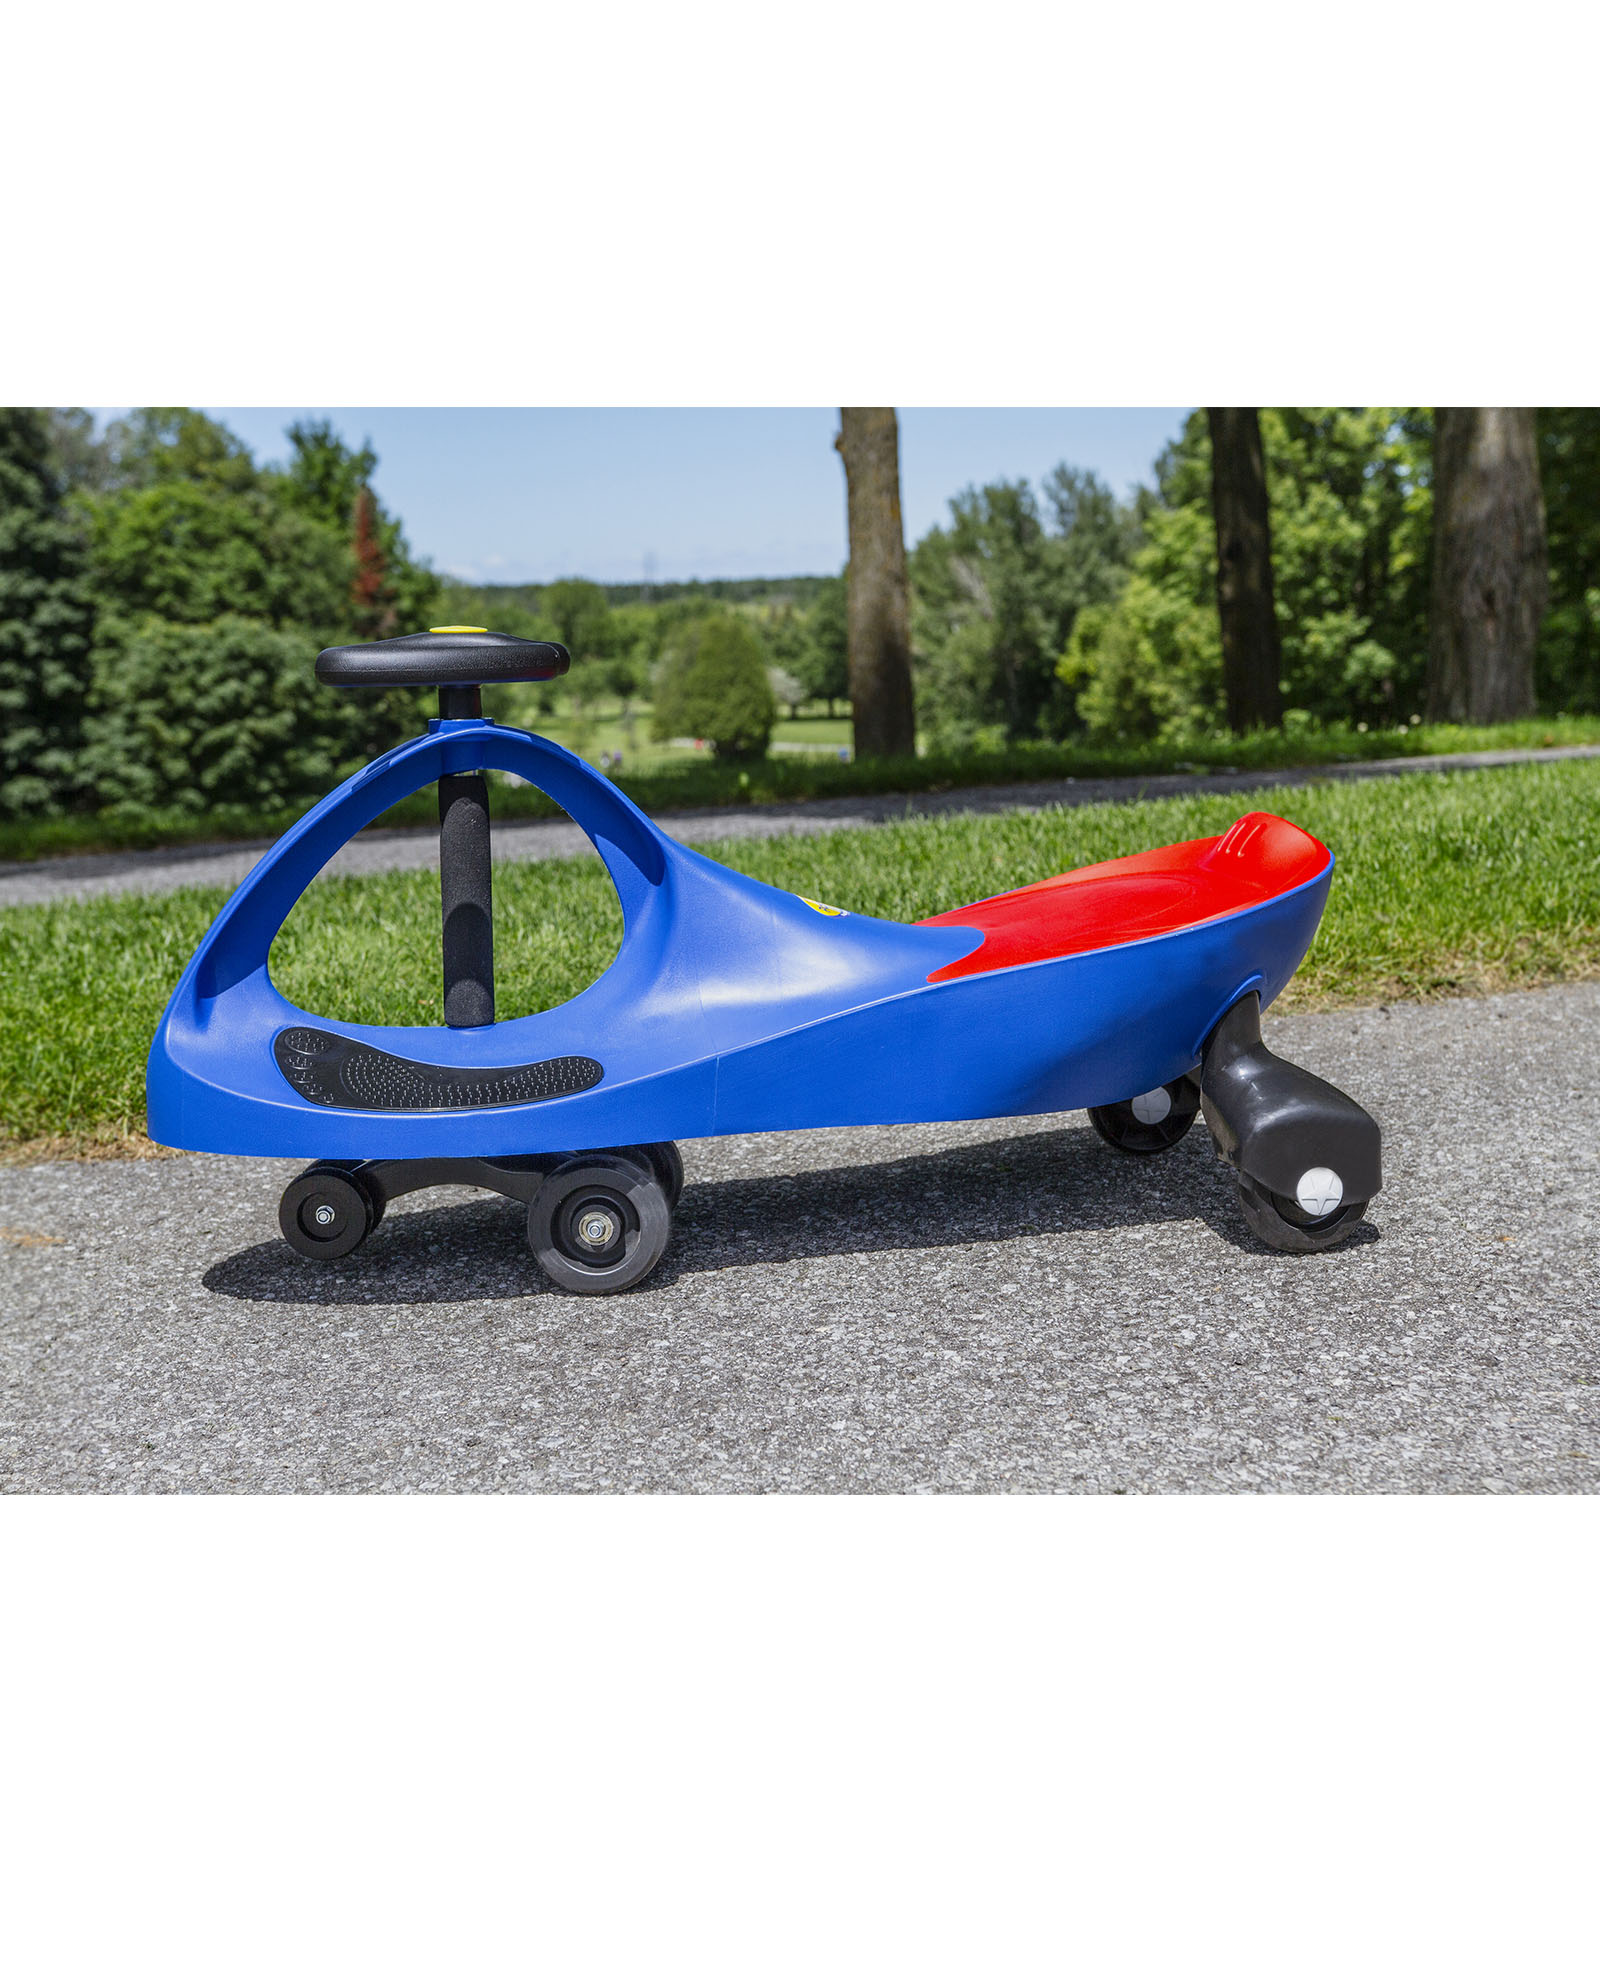 plasma cars for toddlers